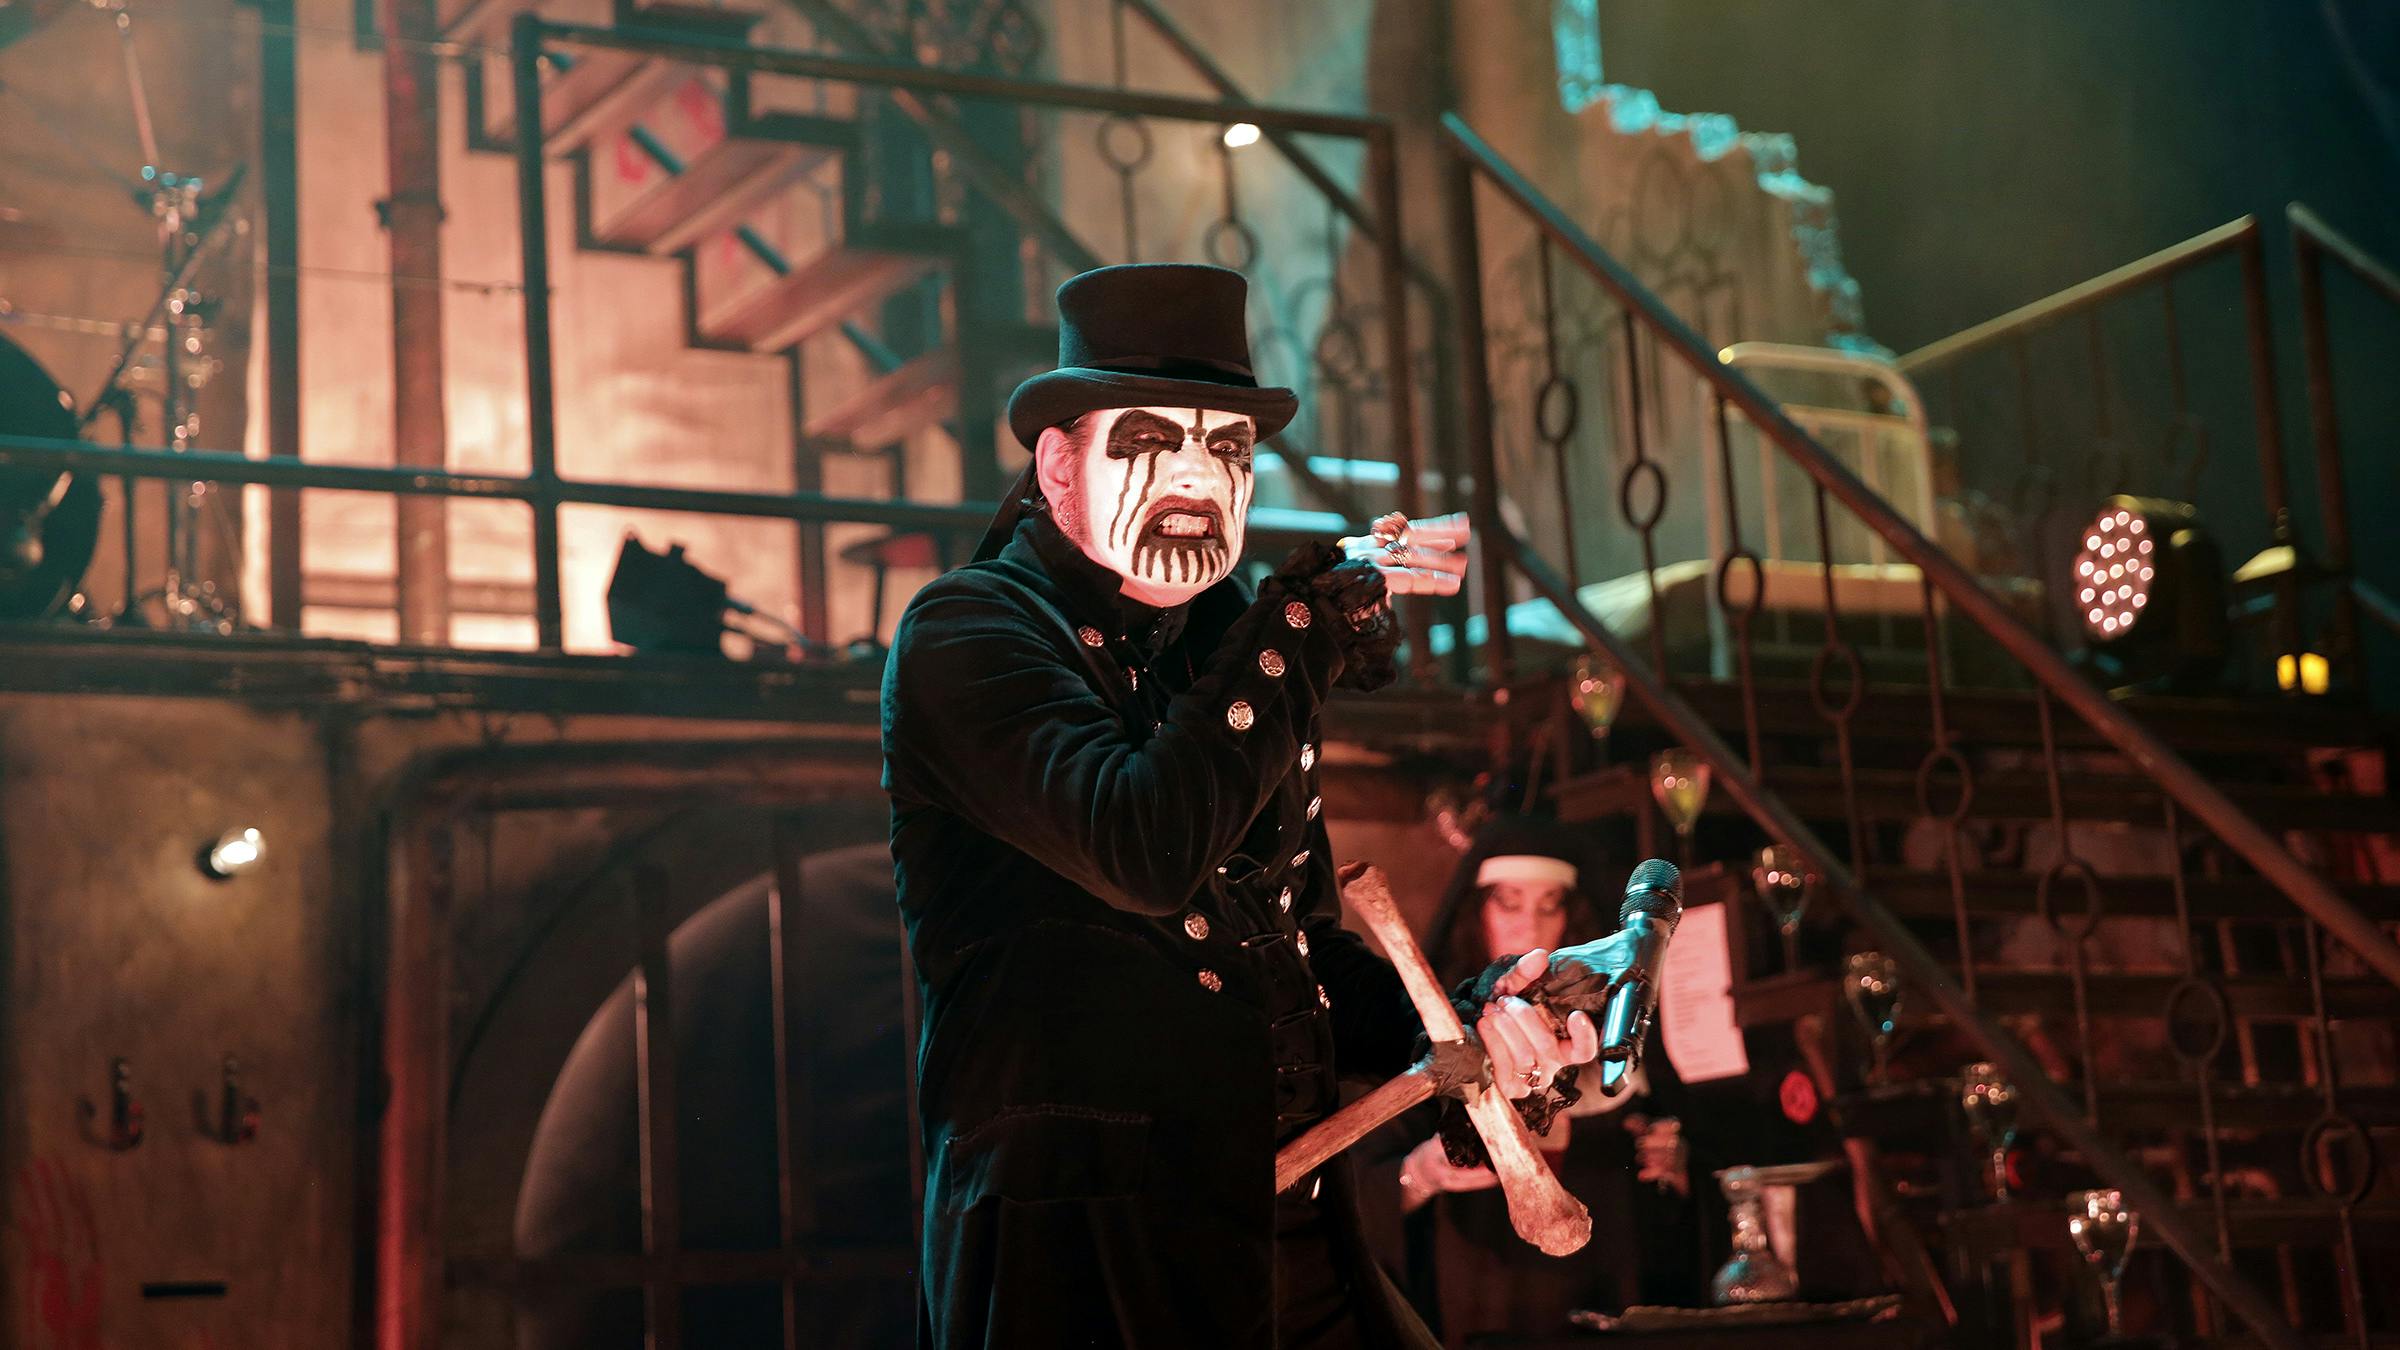 King Diamond’s Live Show Will Remind You Why You Became A Metalhead